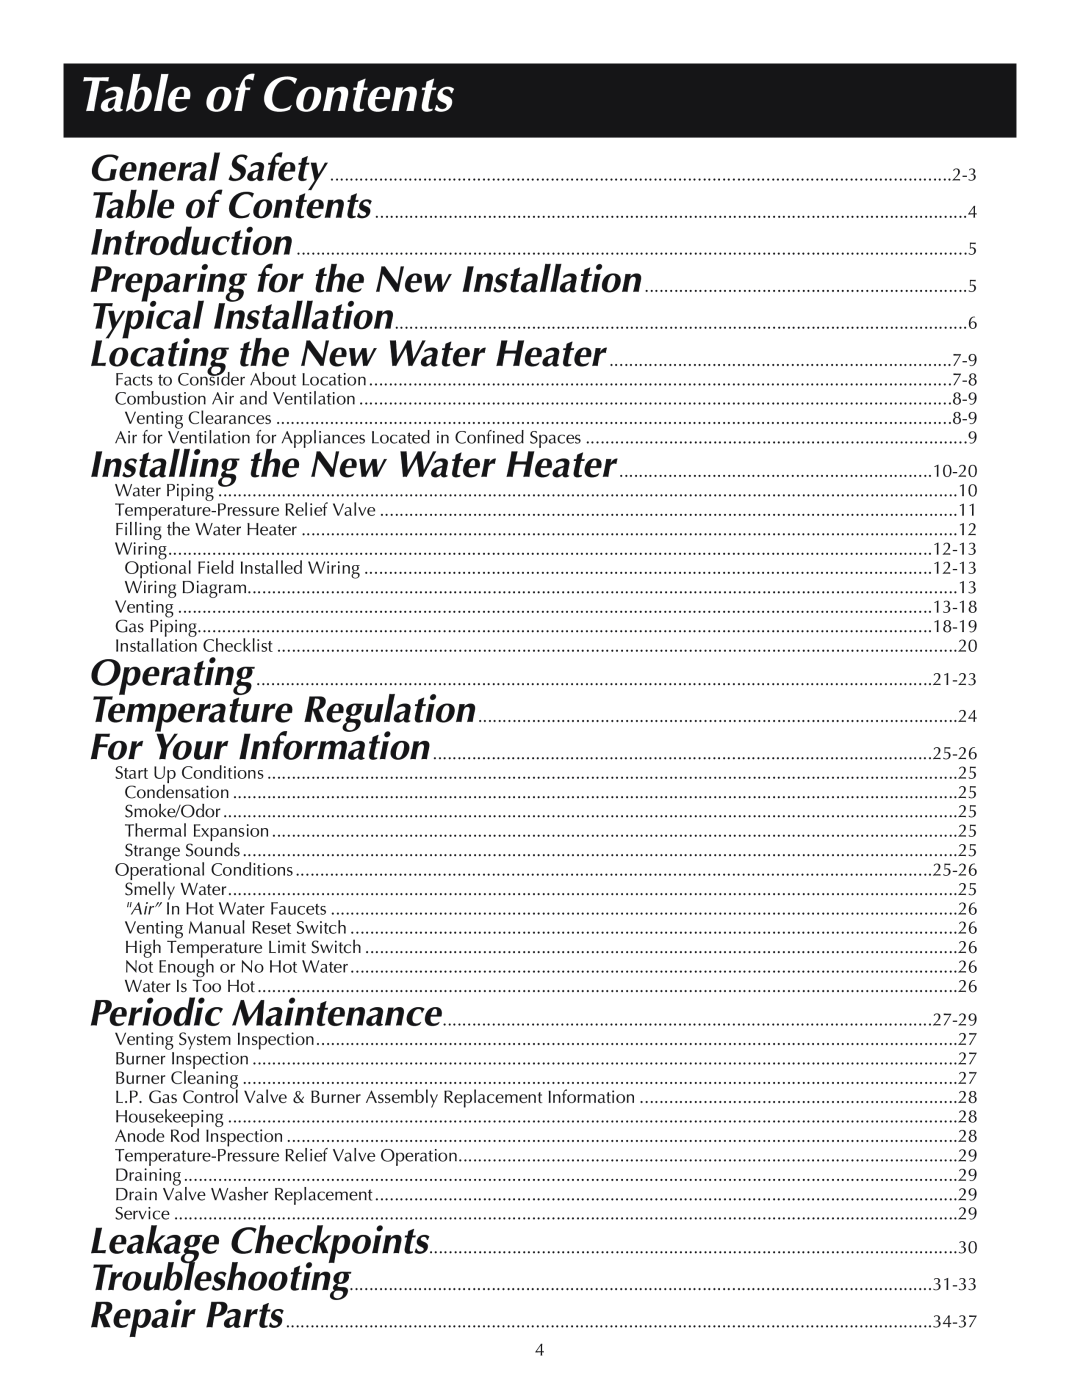 Reliance Water Heaters 11-03, 606, 184333-001 instruction manual Table of Contents 